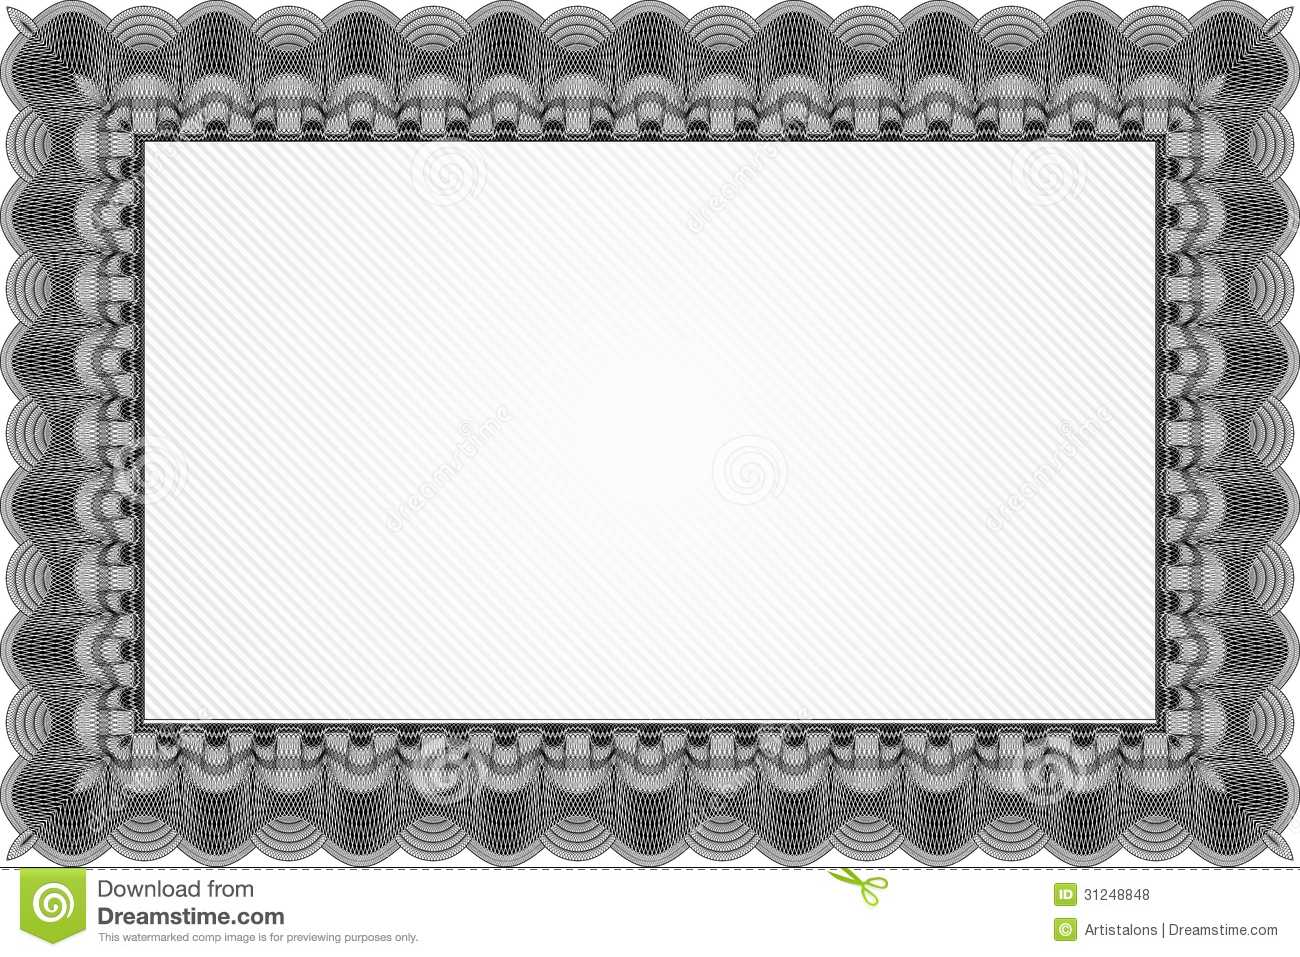 Black Certificate Template Stock Vector. Illustration Of Pertaining To Free Printable Certificate Border Templates